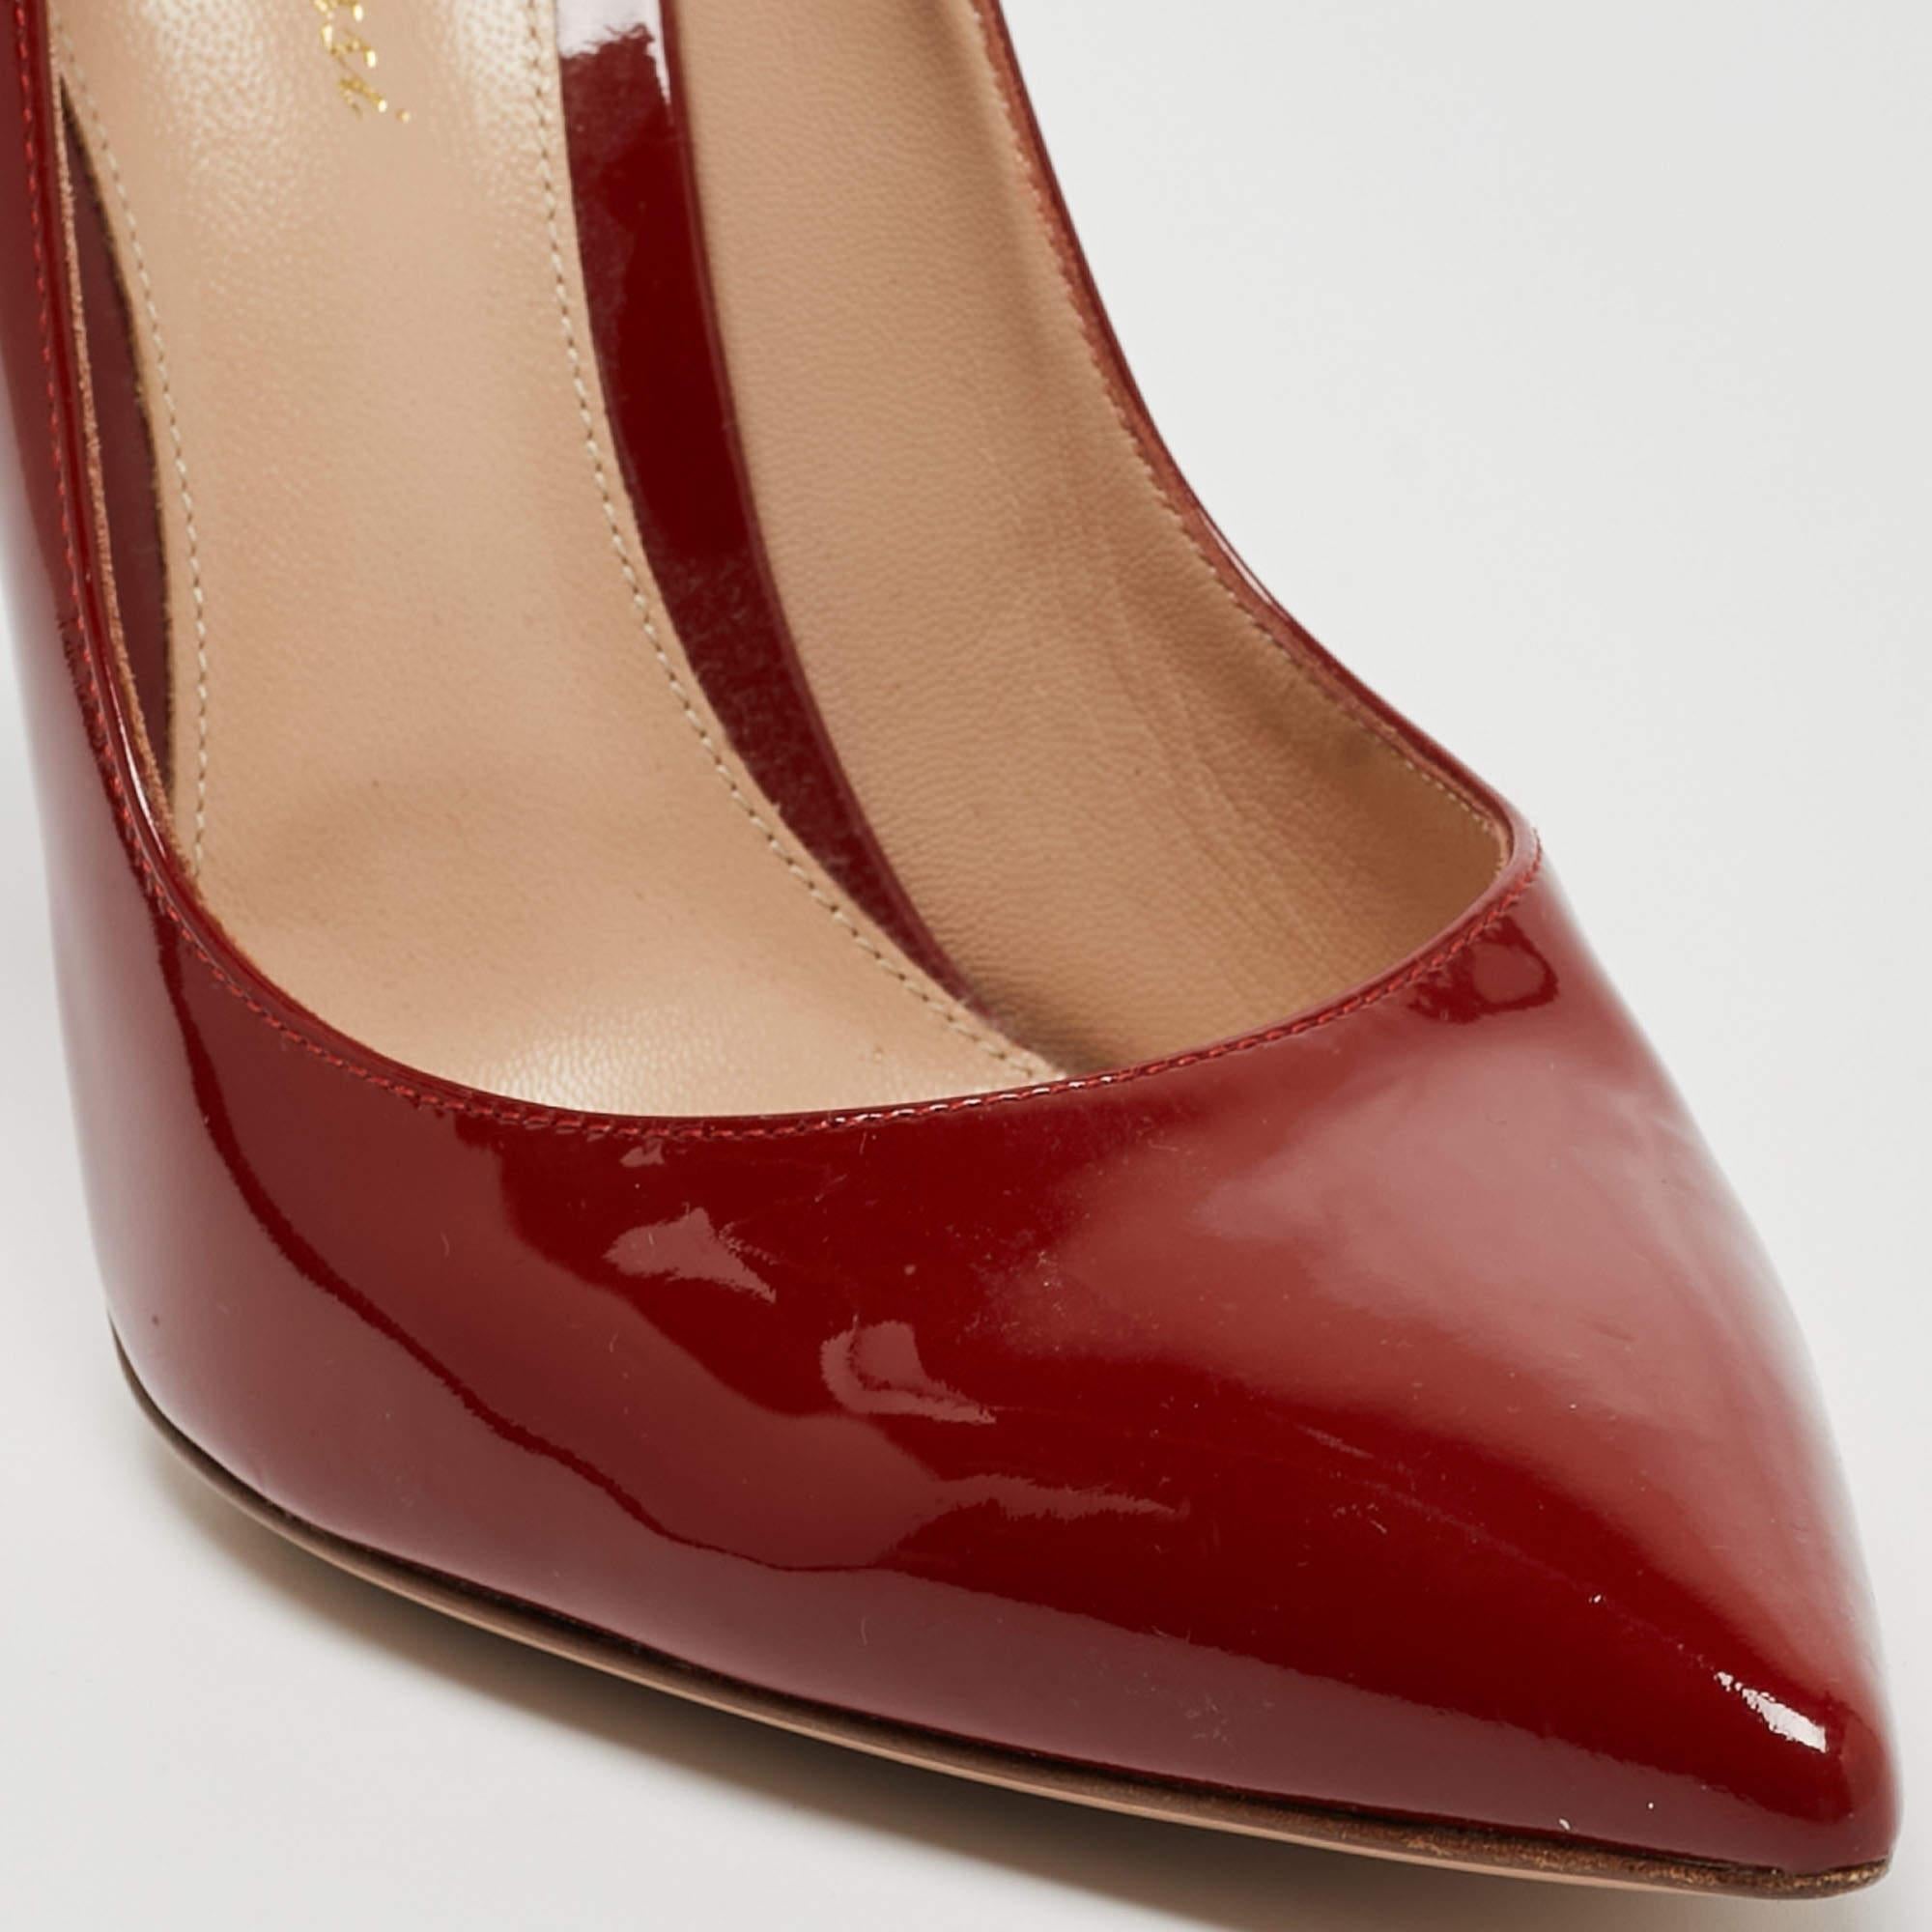 Gianvito Rossi Dark Red Patent Leather Pointed Toe Pumps Size 41 For Sale 2